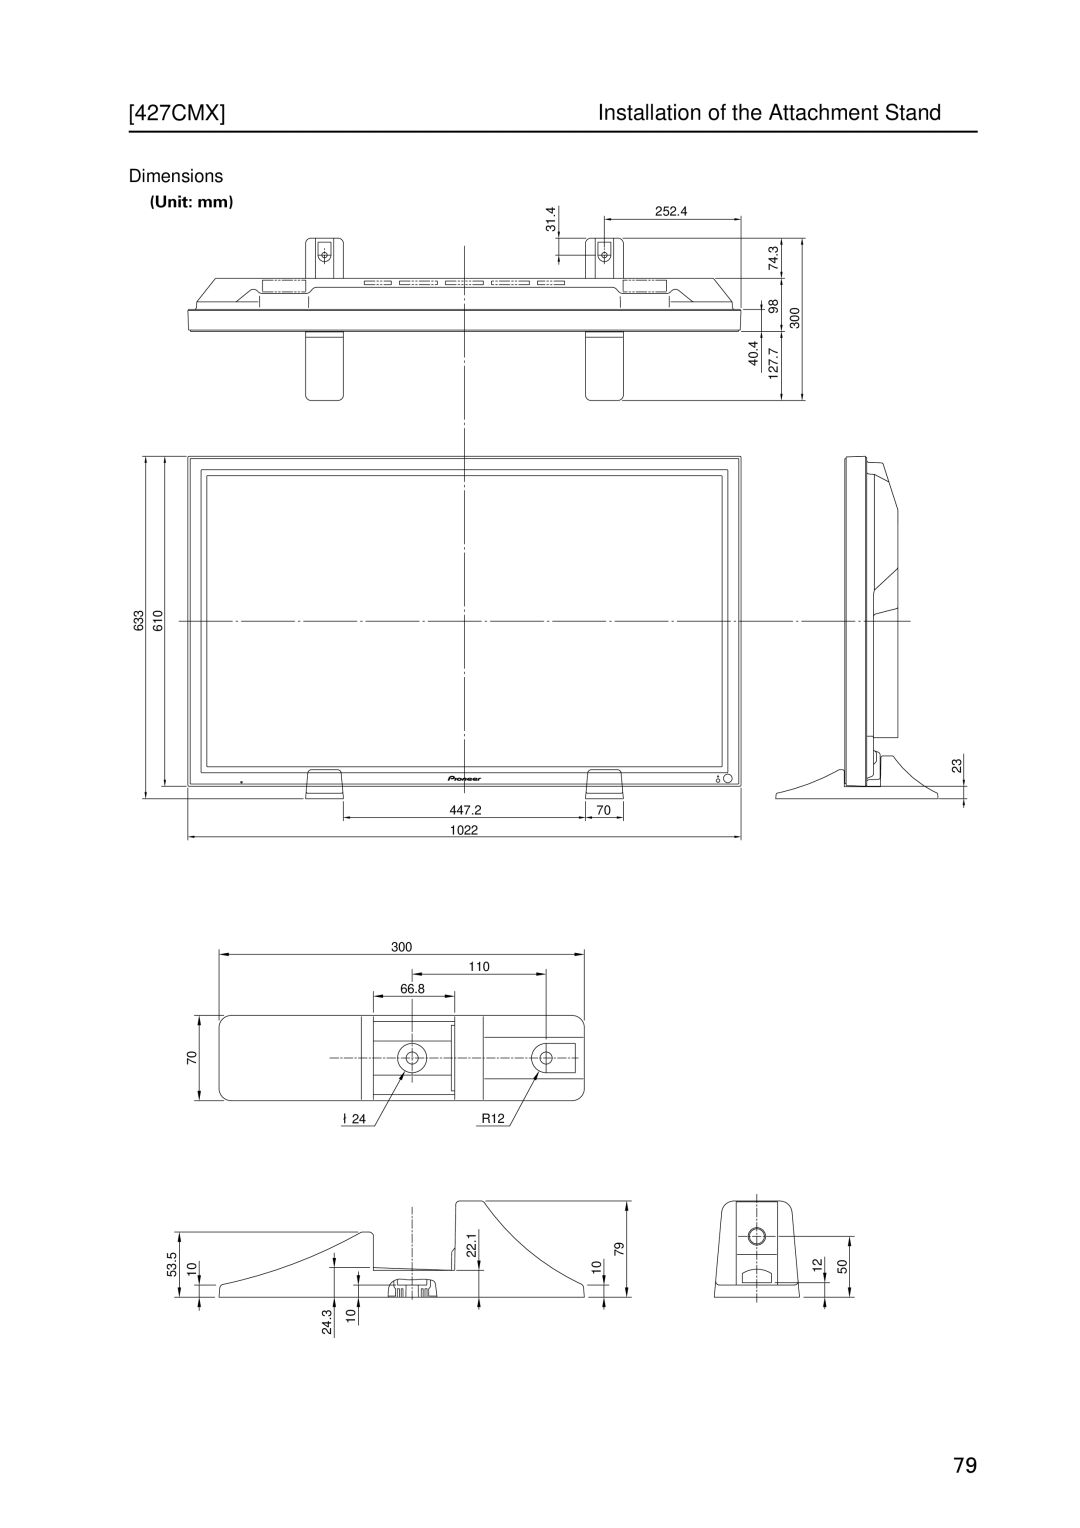 Pioneer PDP 427CMX technical manual 427CMX Installation of the Attachment Stand, Dimensions 